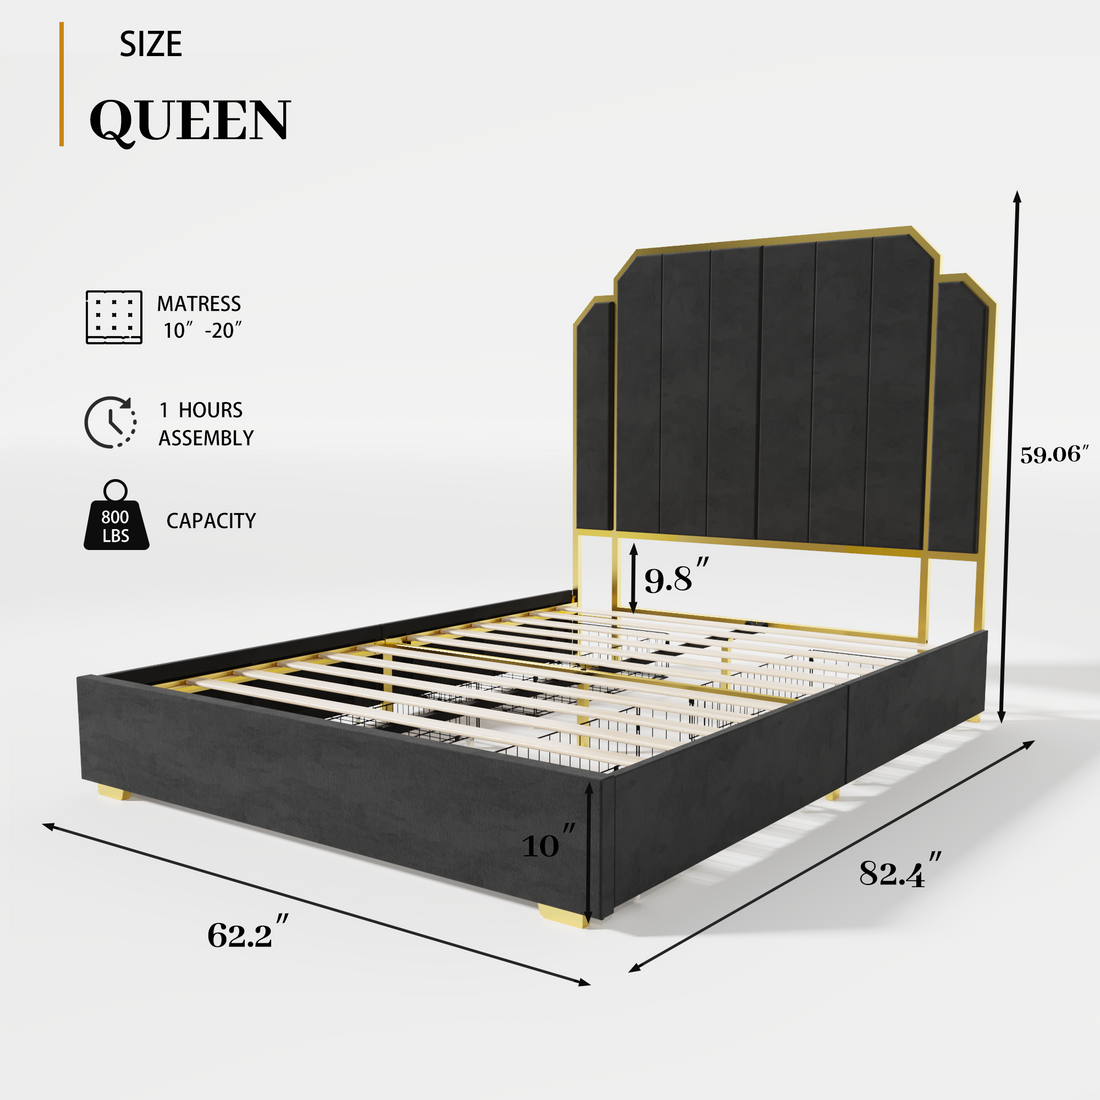 Queen Size Bed Frame And 59.06" Headboard,